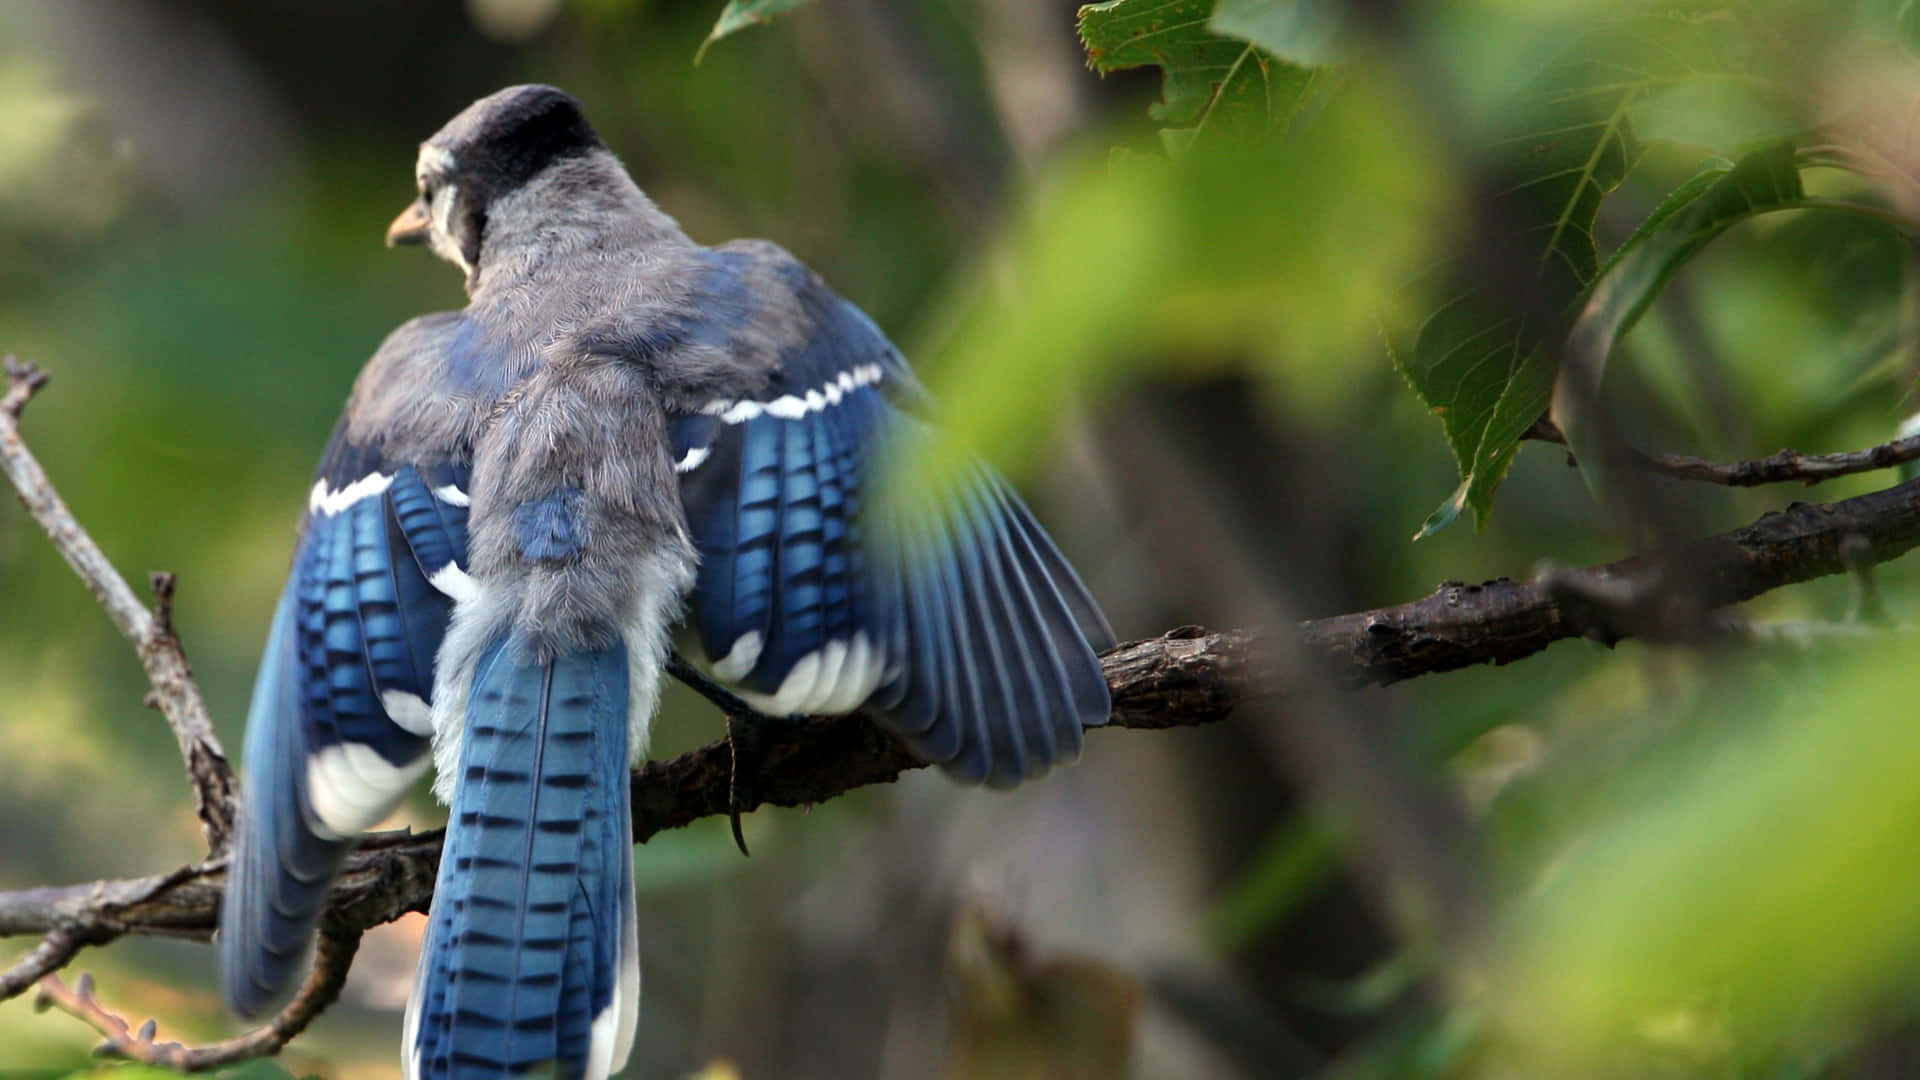 A vibrant Blue Jay stands out among lush green foliage